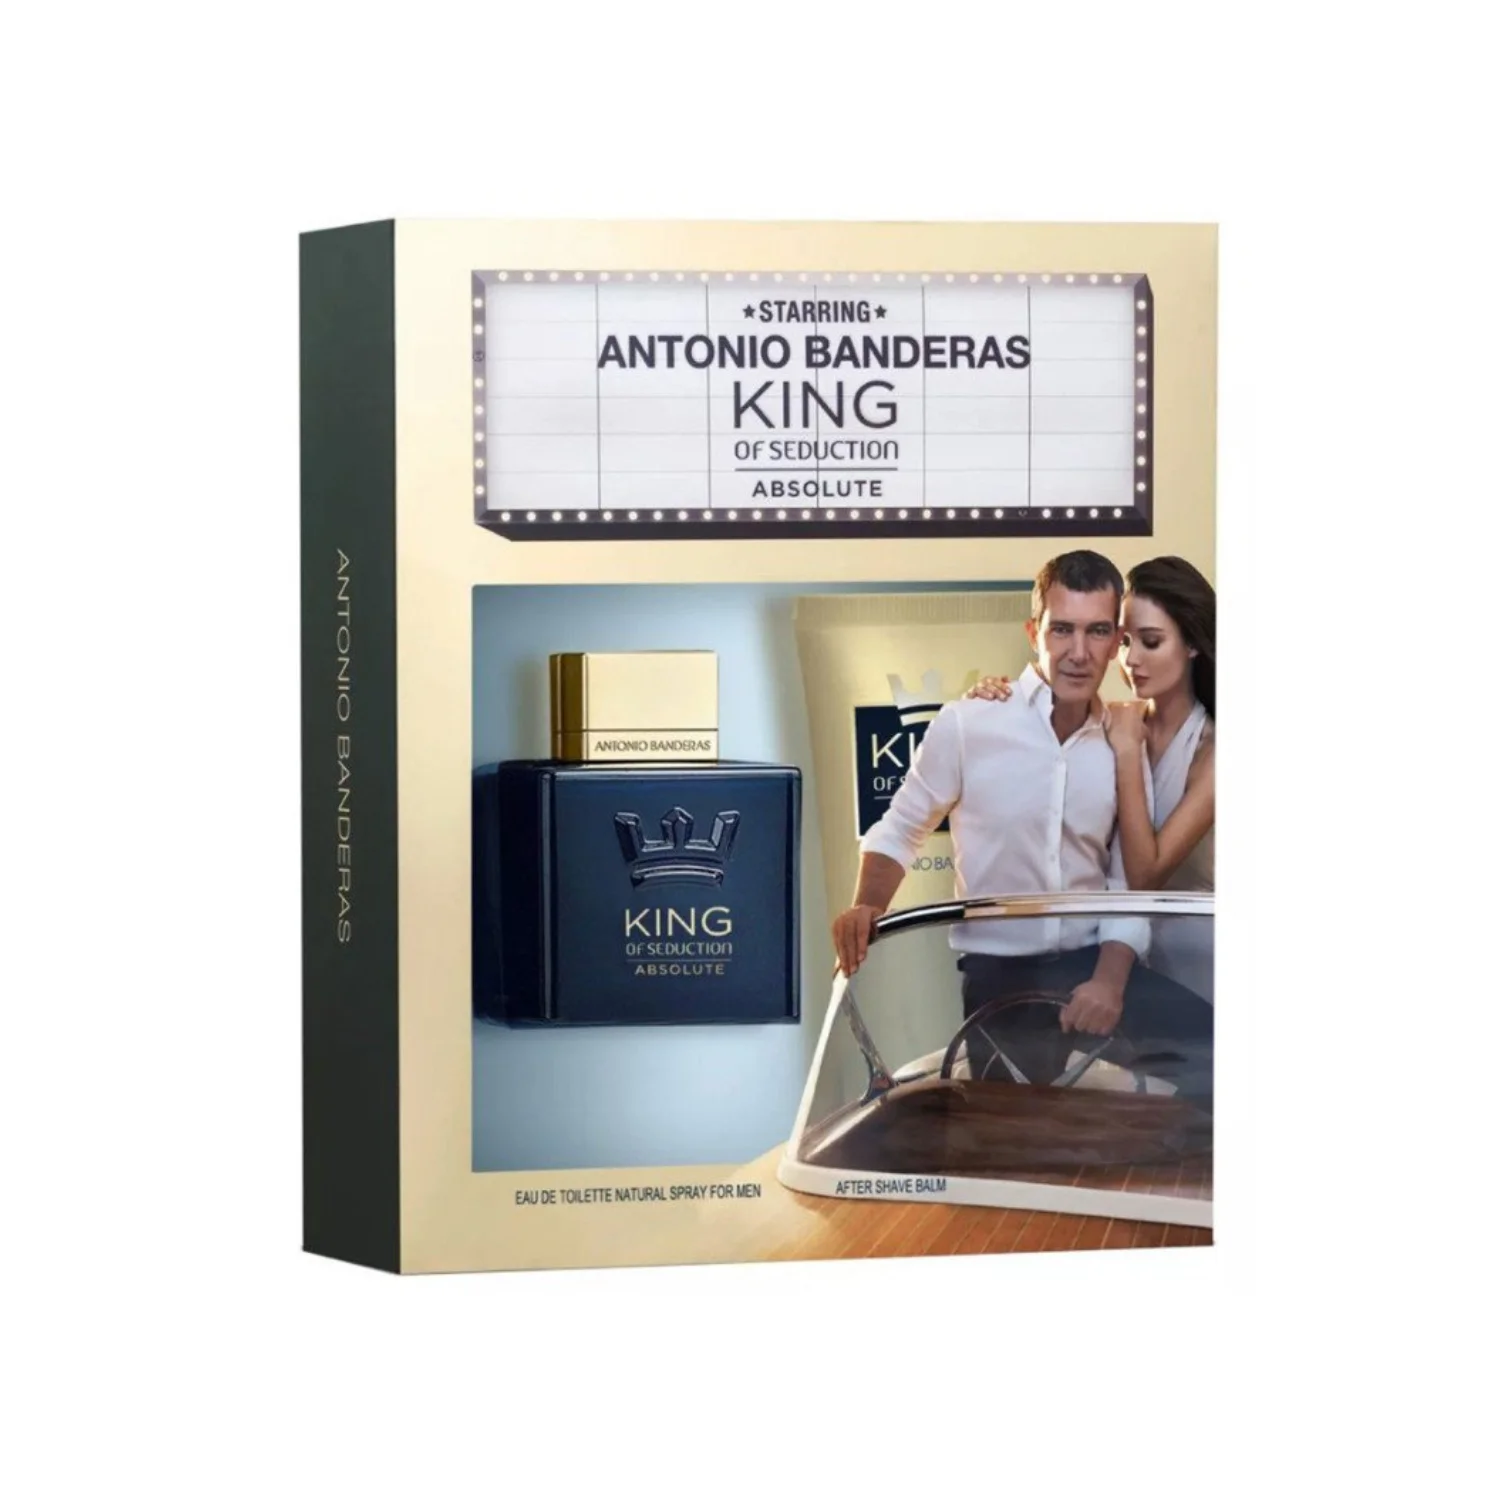 ANTONIO BANDERAS King Of Seduction Absolute Edt 100 ml + After Shave Lotion 100 ml Men's Perfume Set